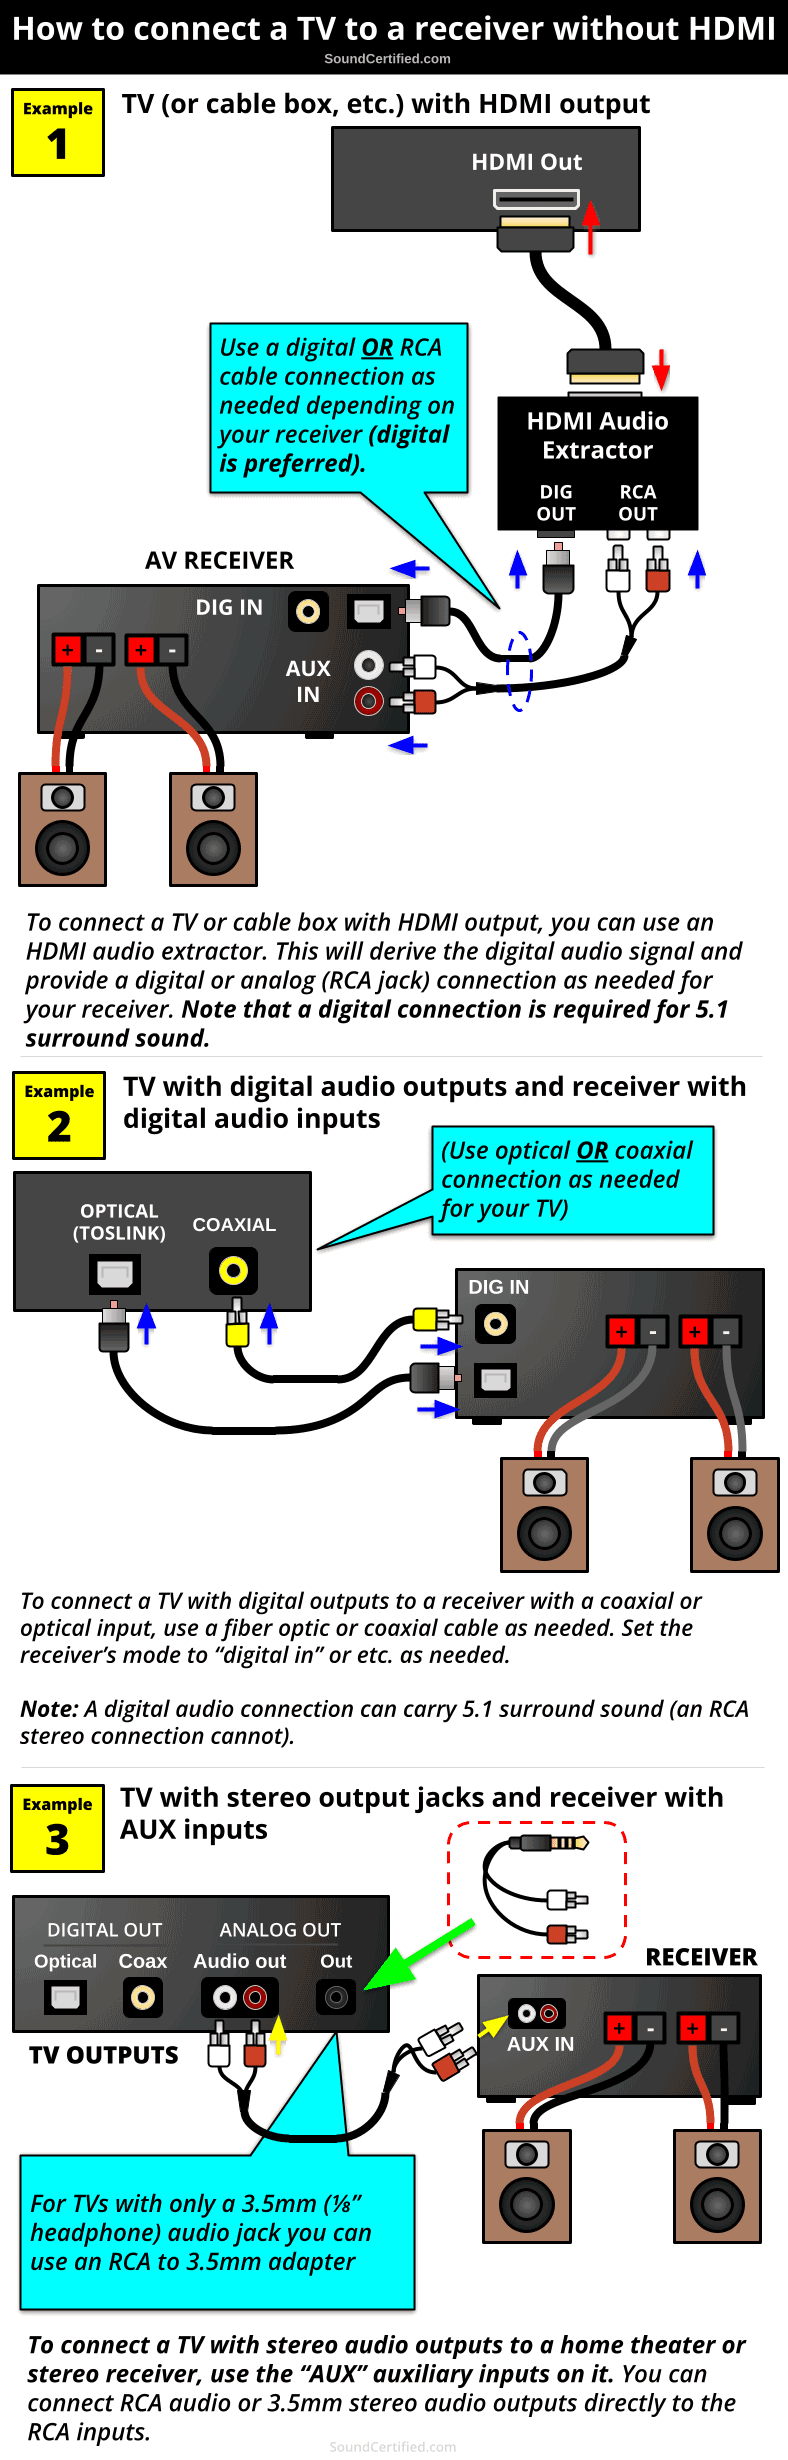 How do i connect my chromecast to my av receiver without hdmi?